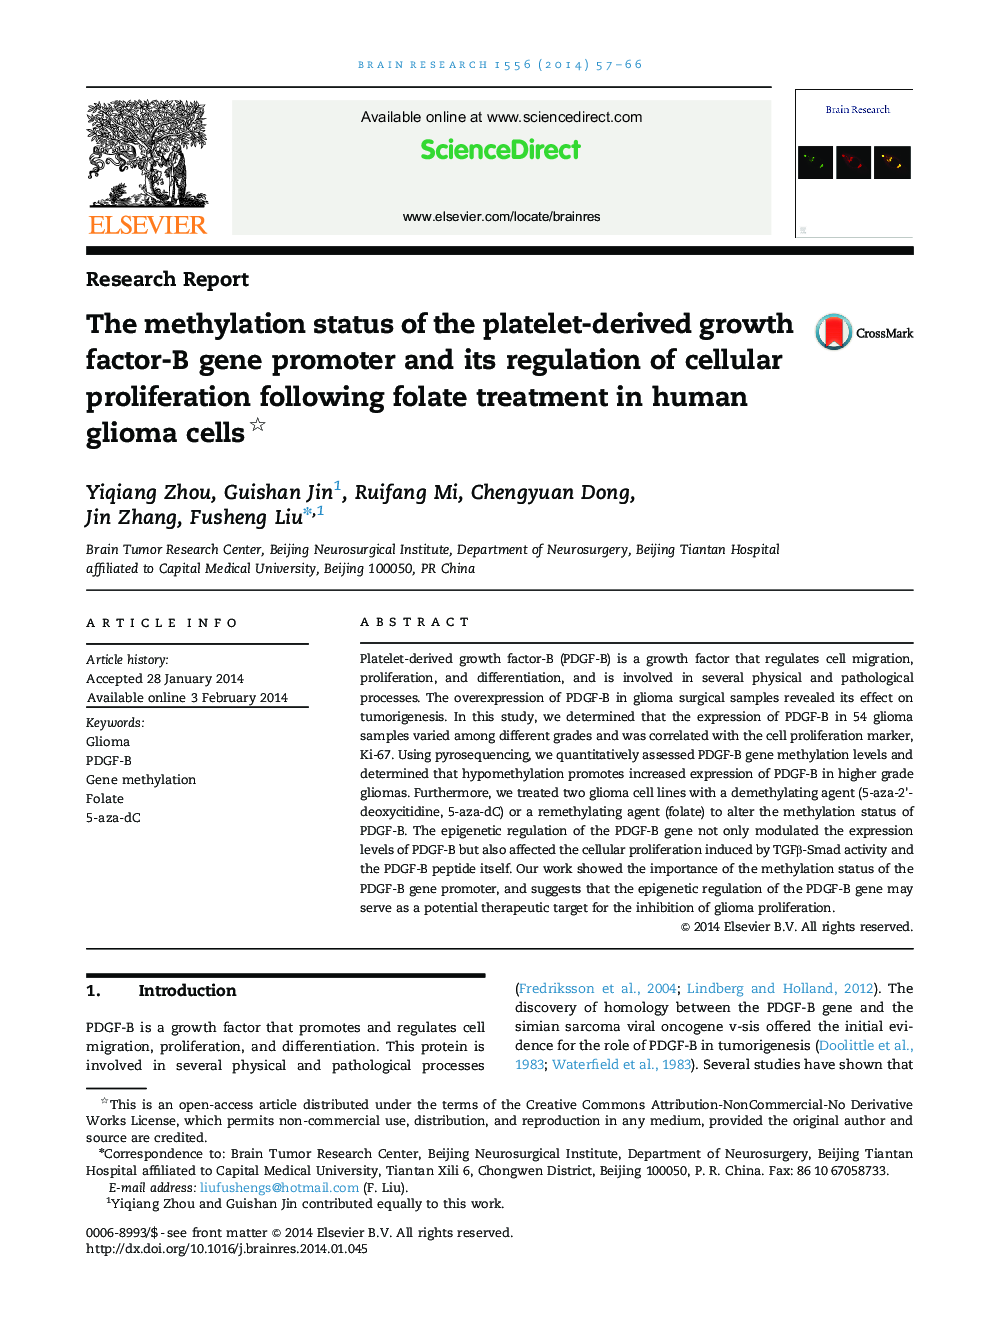 The methylation status of the platelet-derived growth factor-B gene promoter and its regulation of cellular proliferation following folate treatment in human glioma cells 